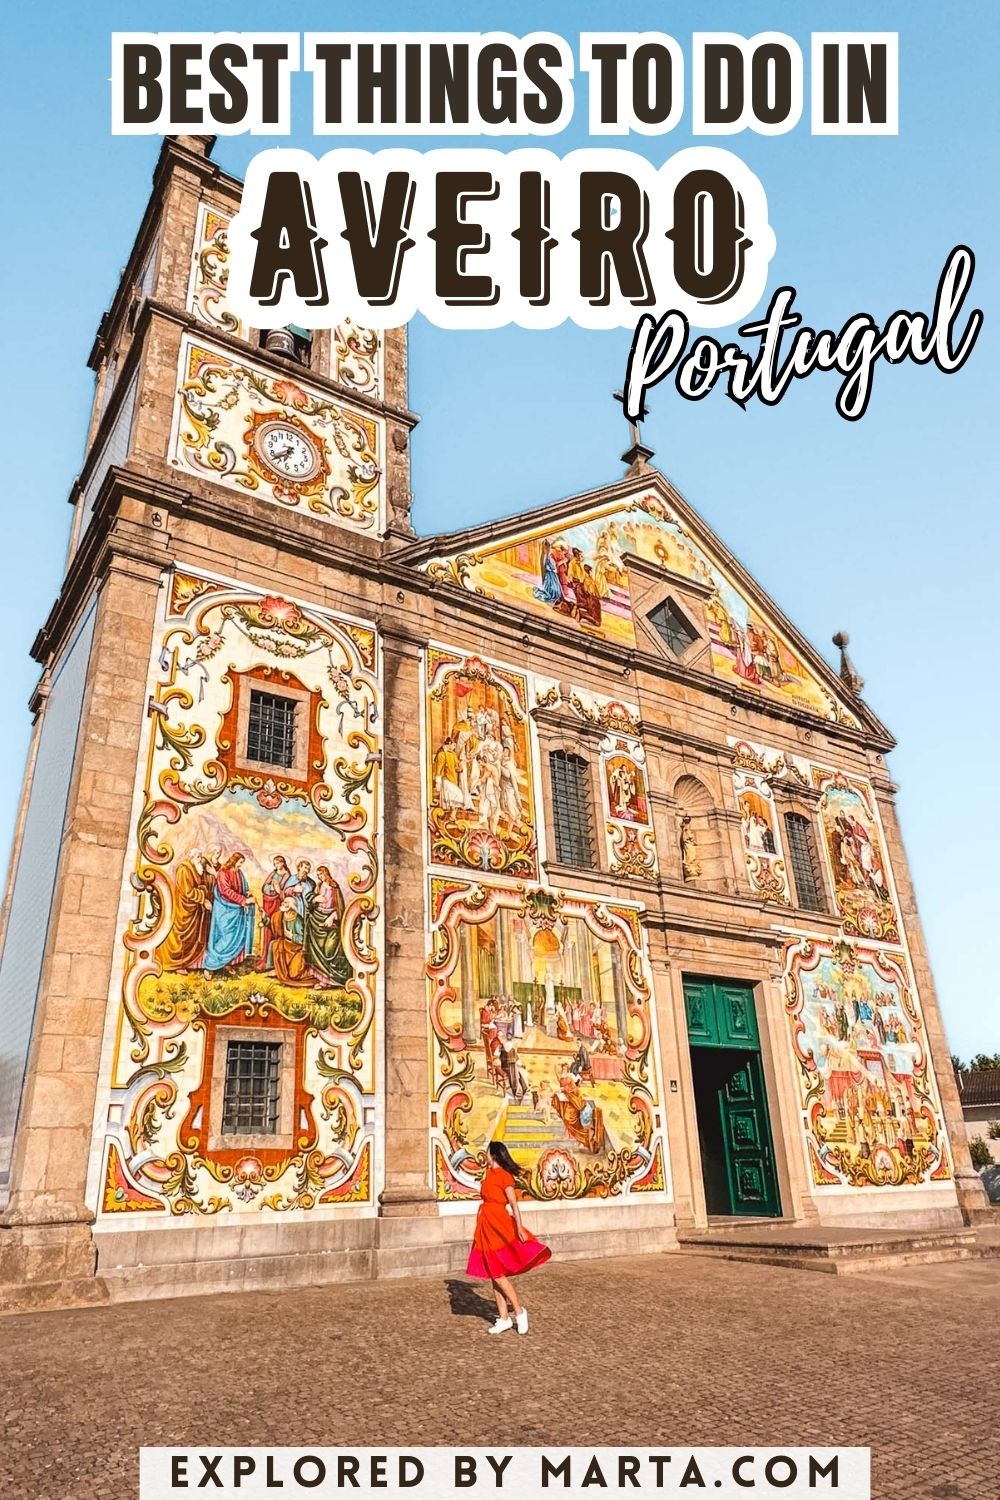 Best things to do in Aveiro, Portugal